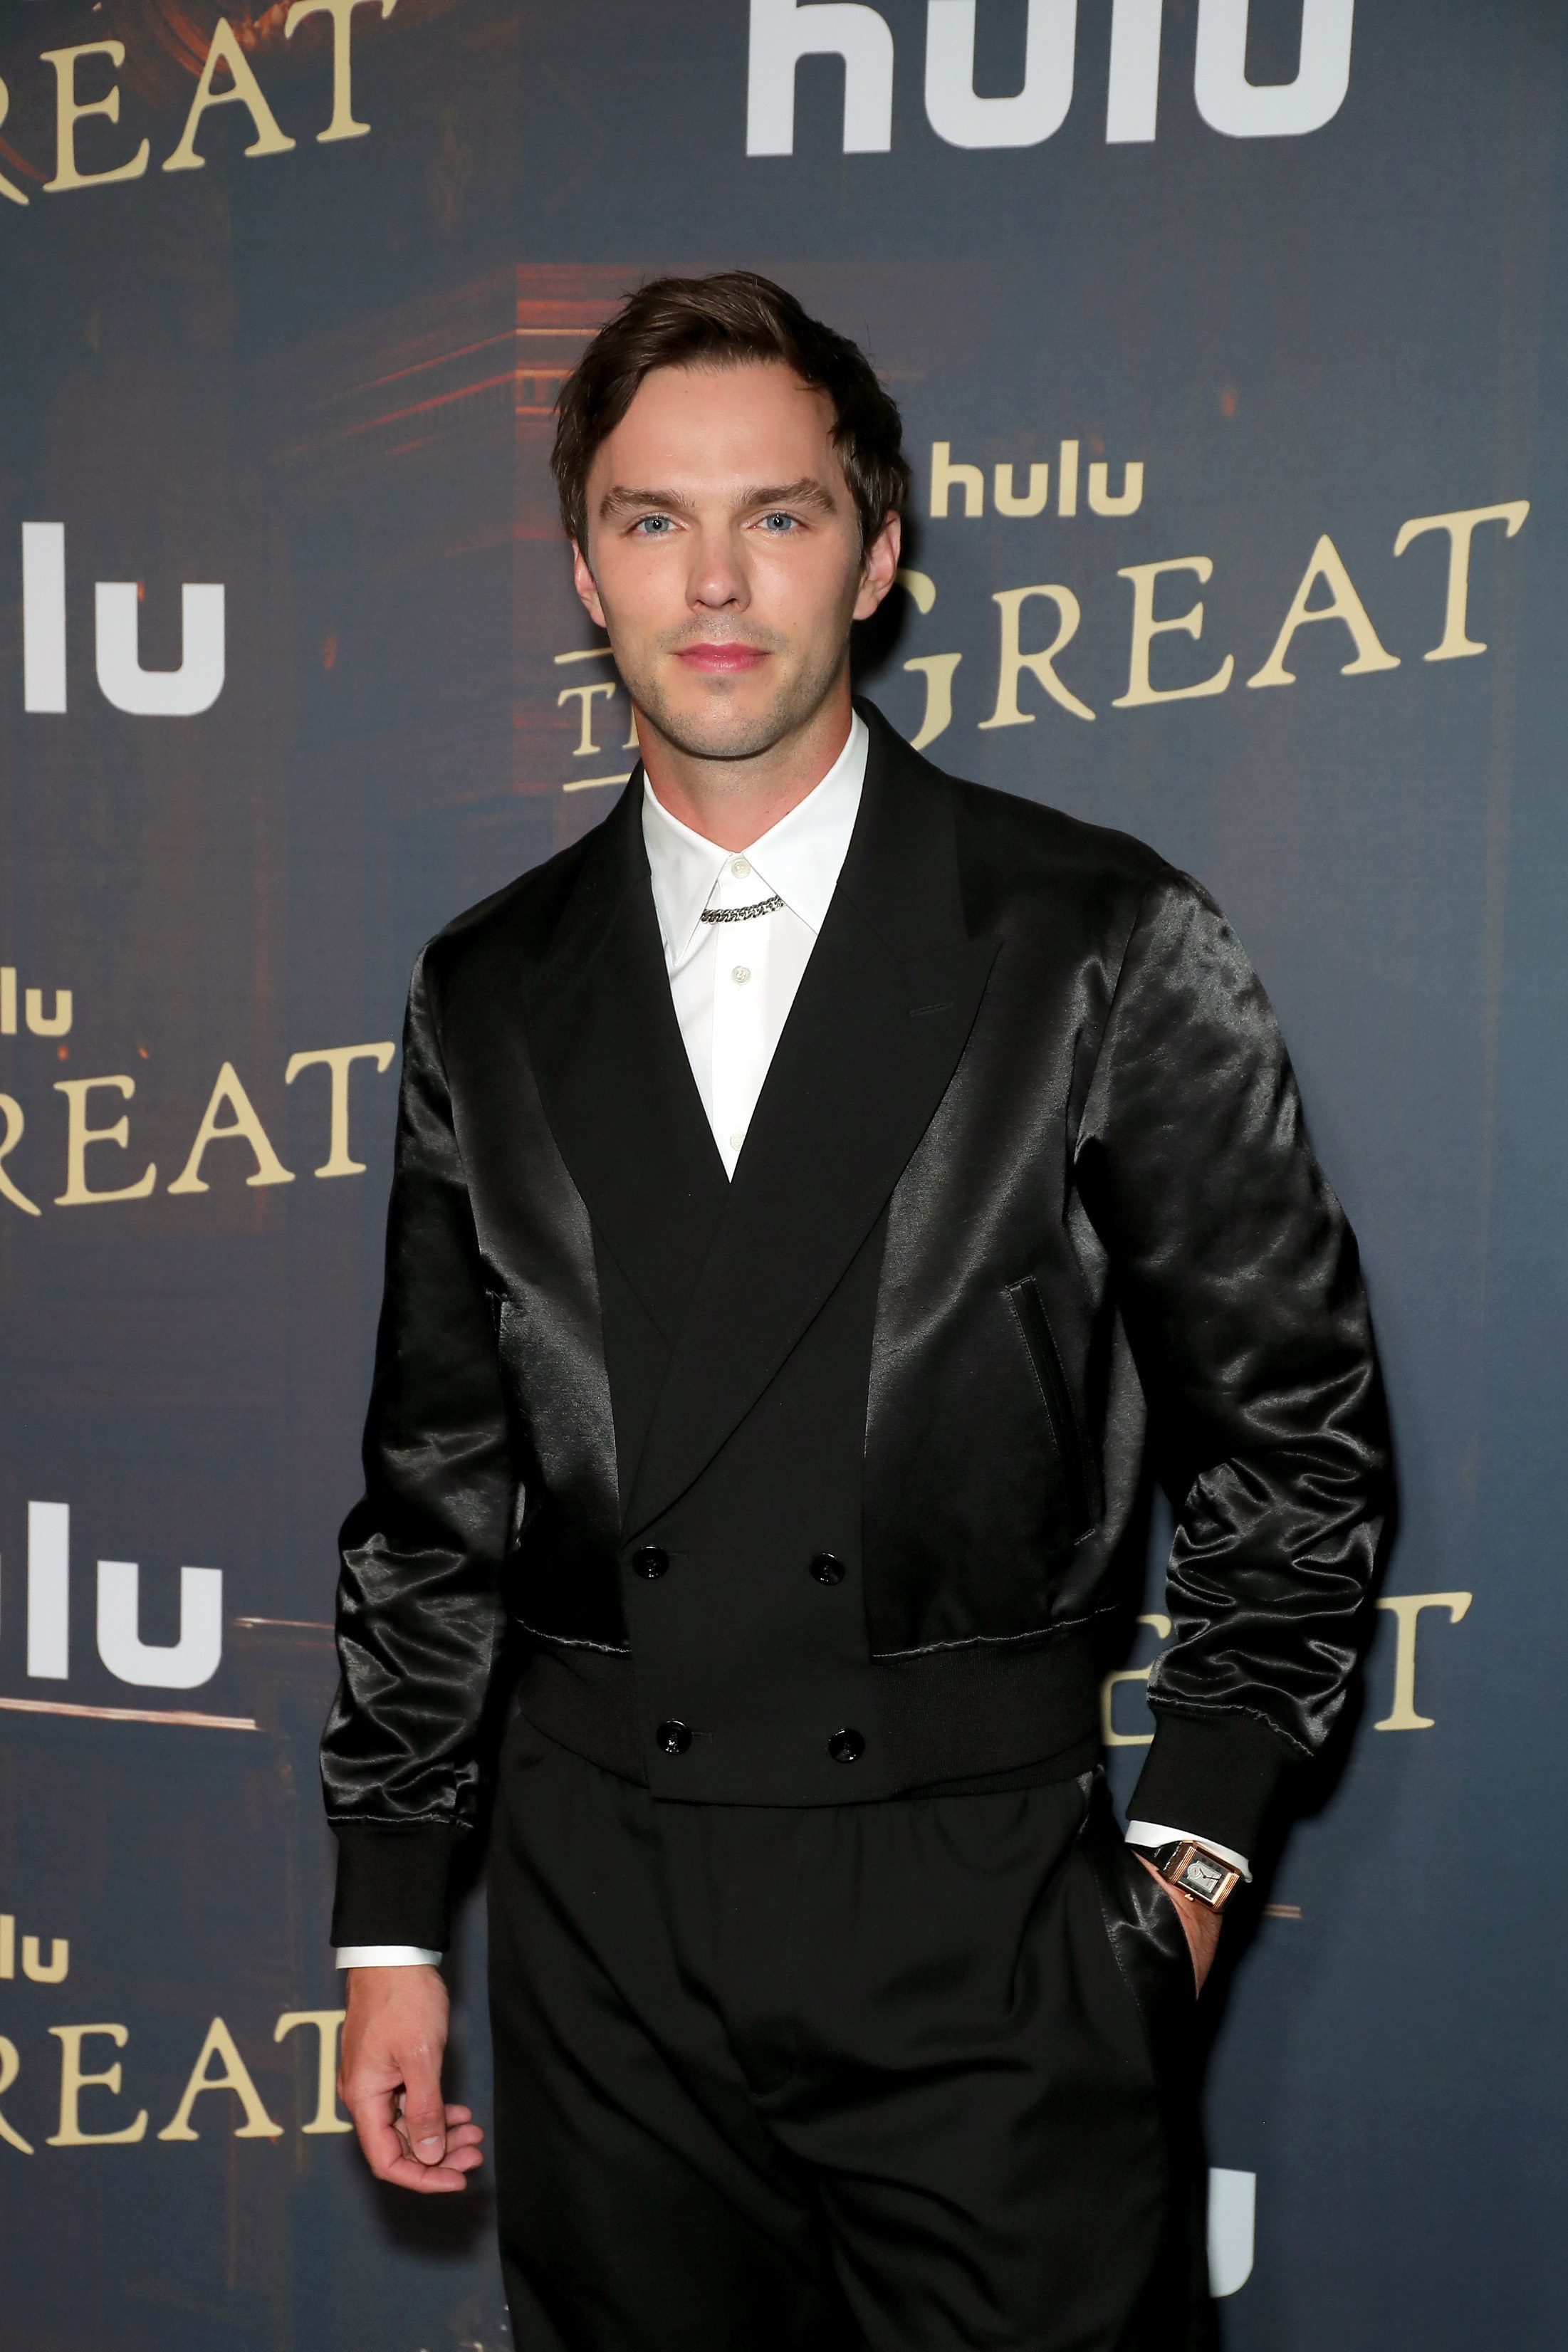 Hoult in a fitted suit for The Great premiere